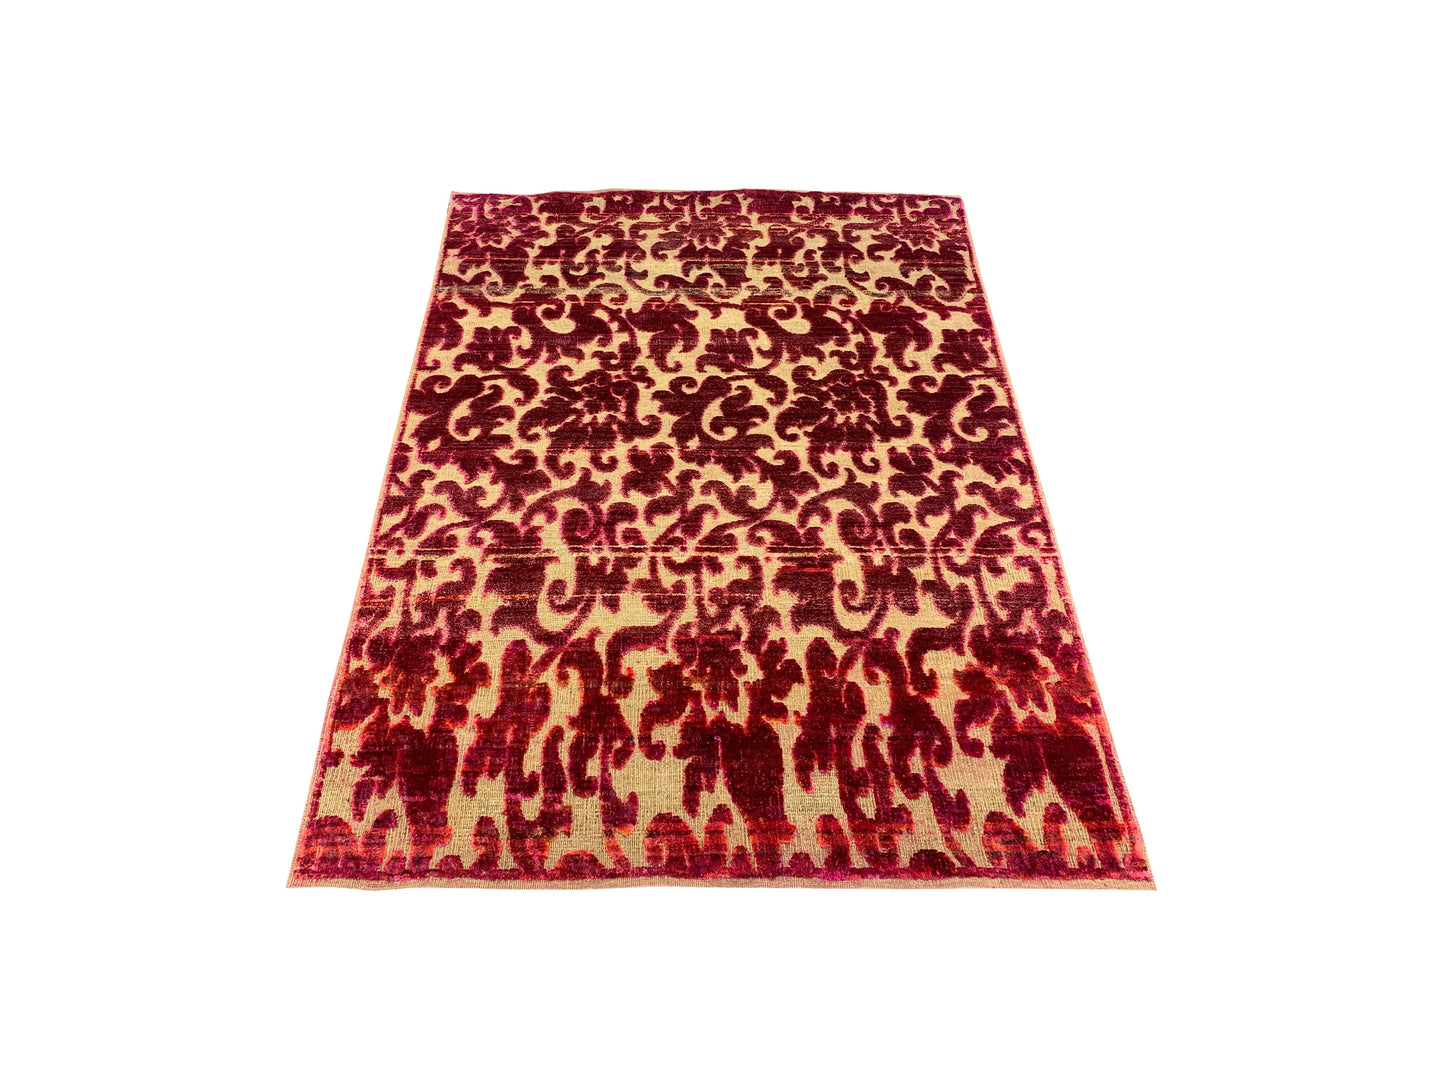 Get trendy with Pink Red Sari Silk Wool Modern Handknotted Area Rug 3.11x5.7Ft 120x168Cms - Modern Rugs available at Jaipur Oriental Rugs. Grab yours for $1315.00 today!